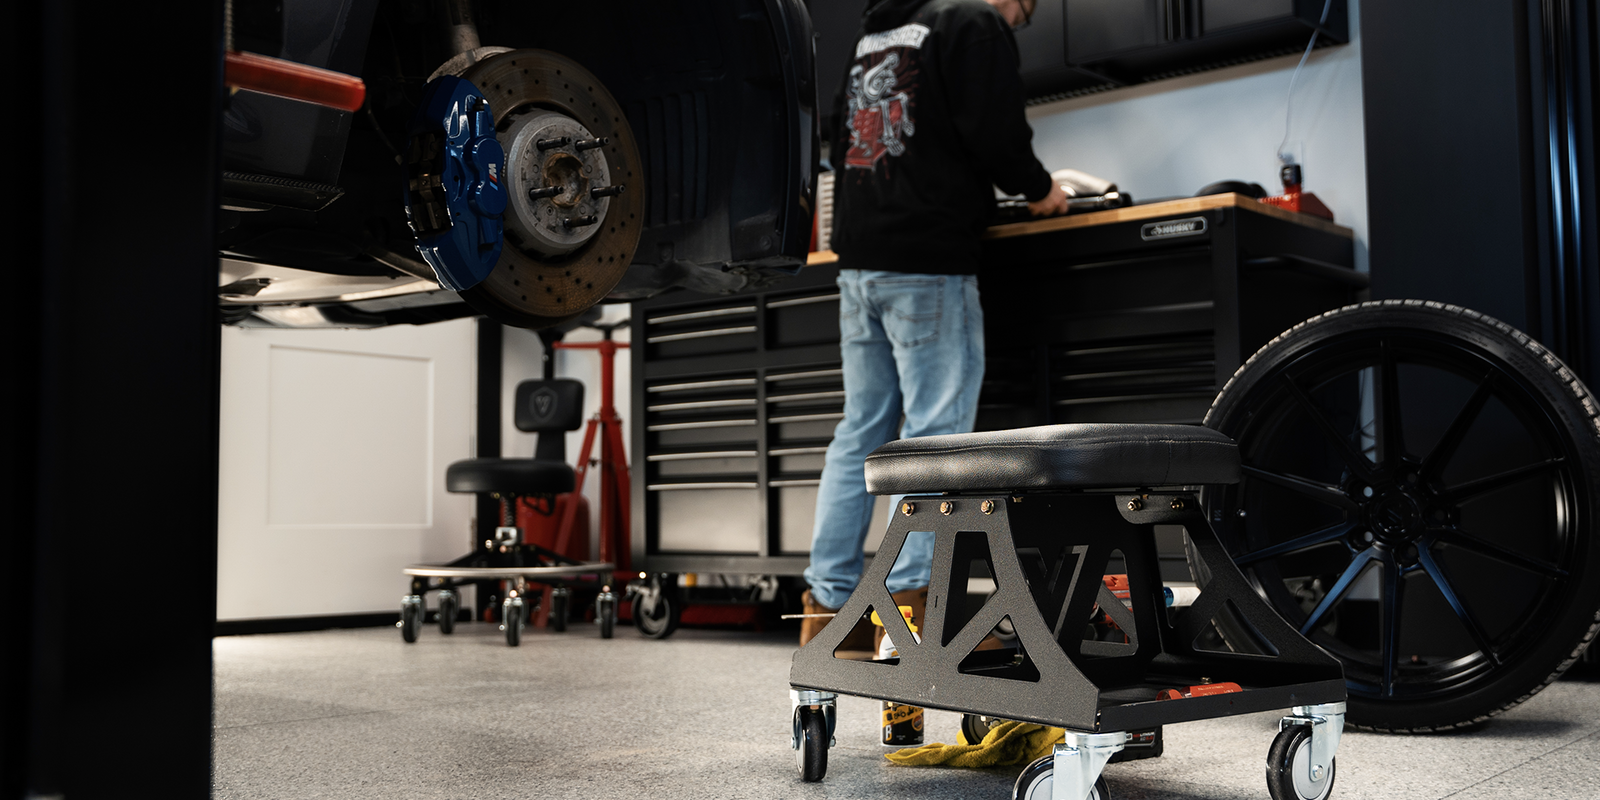 Man in black shirt and jeans working in garage with Vyper chair in the foreground